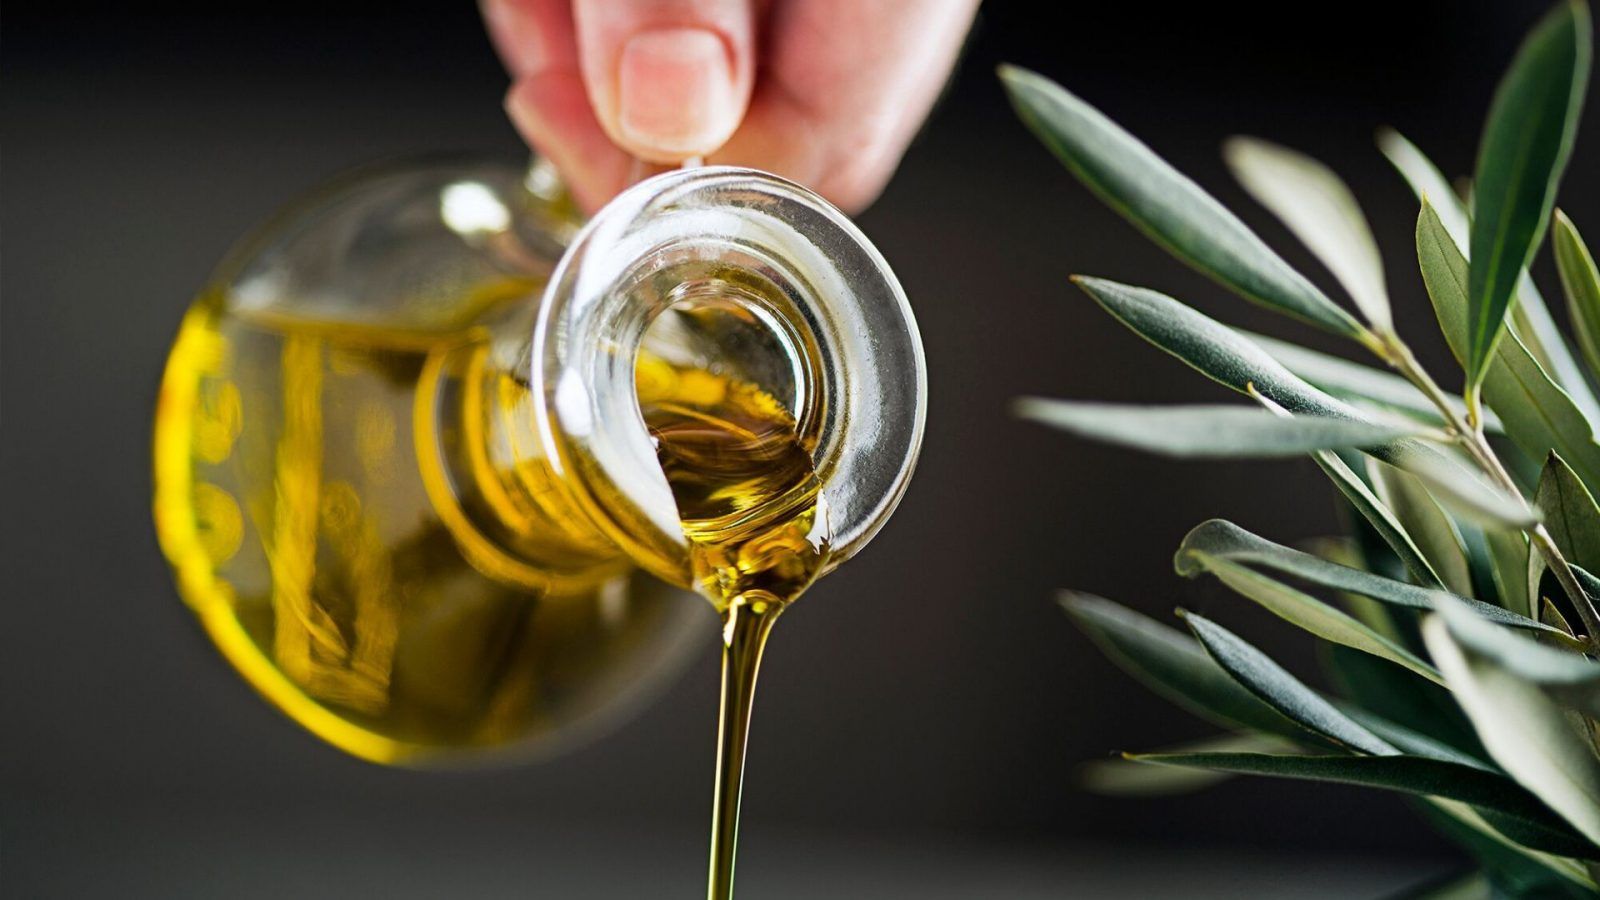 How to select the best extra-virgin olive oil: Tips from olive oil sommeliers